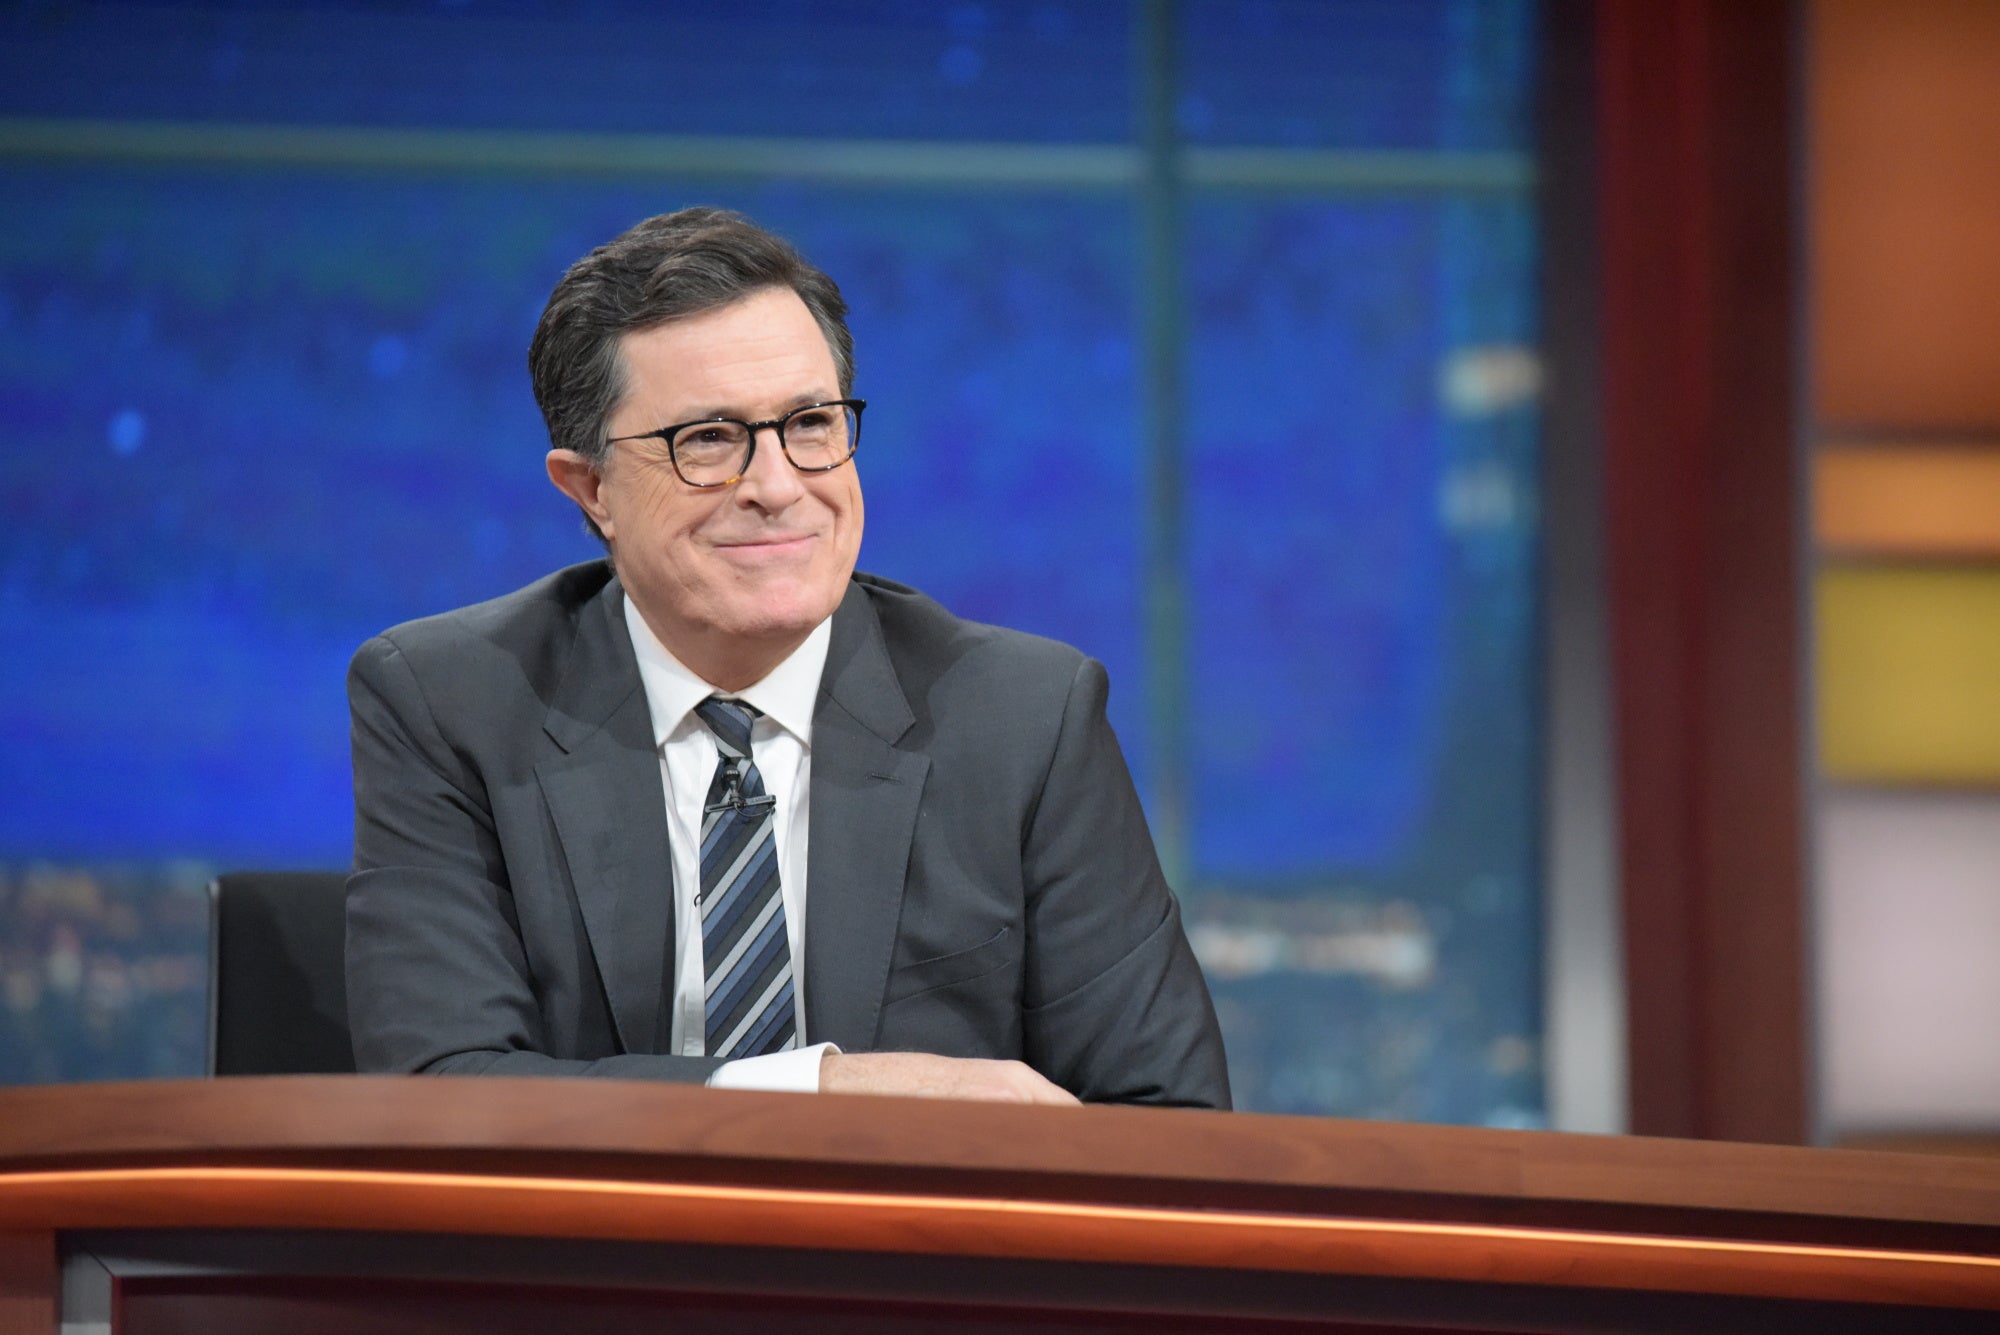 Stephen Colbert Pokes Fun At ‘Hidden Fences’ Goof With Hilarious Trailer